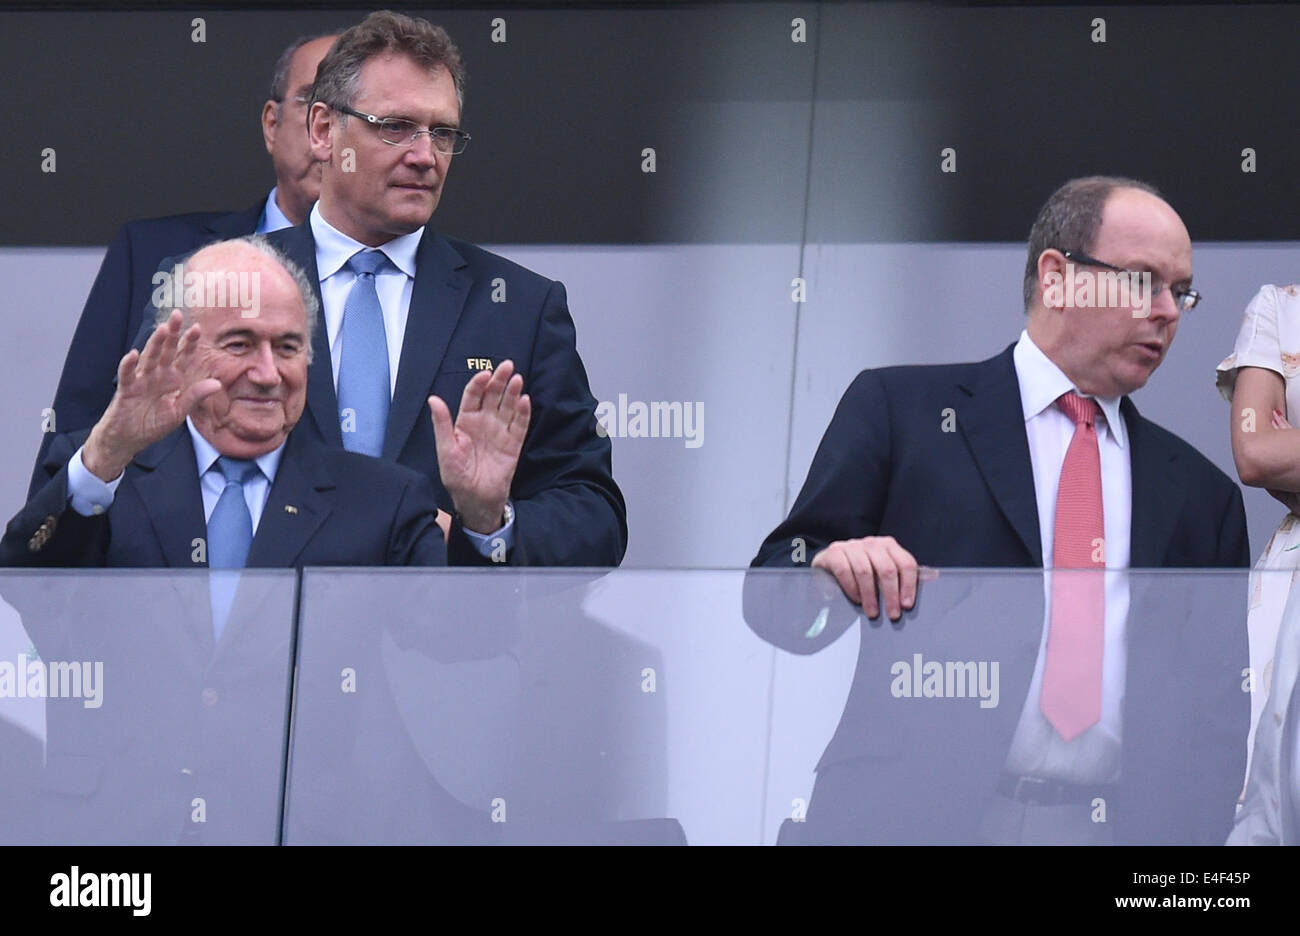 Sao Paulo, Brazil. 09th July, 2014. President of FIFA (Fédération Internationale de Football Association), Joseph 'Sepp' Blatter (L), Prince Albert (R) II of Monaco and FIFA Secretary General Jerome Valcke (C) seen in the stands during the FIFA World Cup 2014 semi-final soccer match between the Netherlands and Argentina at the Arena Corinthians in Sao Paulo, Brazil, 09 July 2014. Photo: Marius Becker/dpa/Alamy Live News Stock Photo